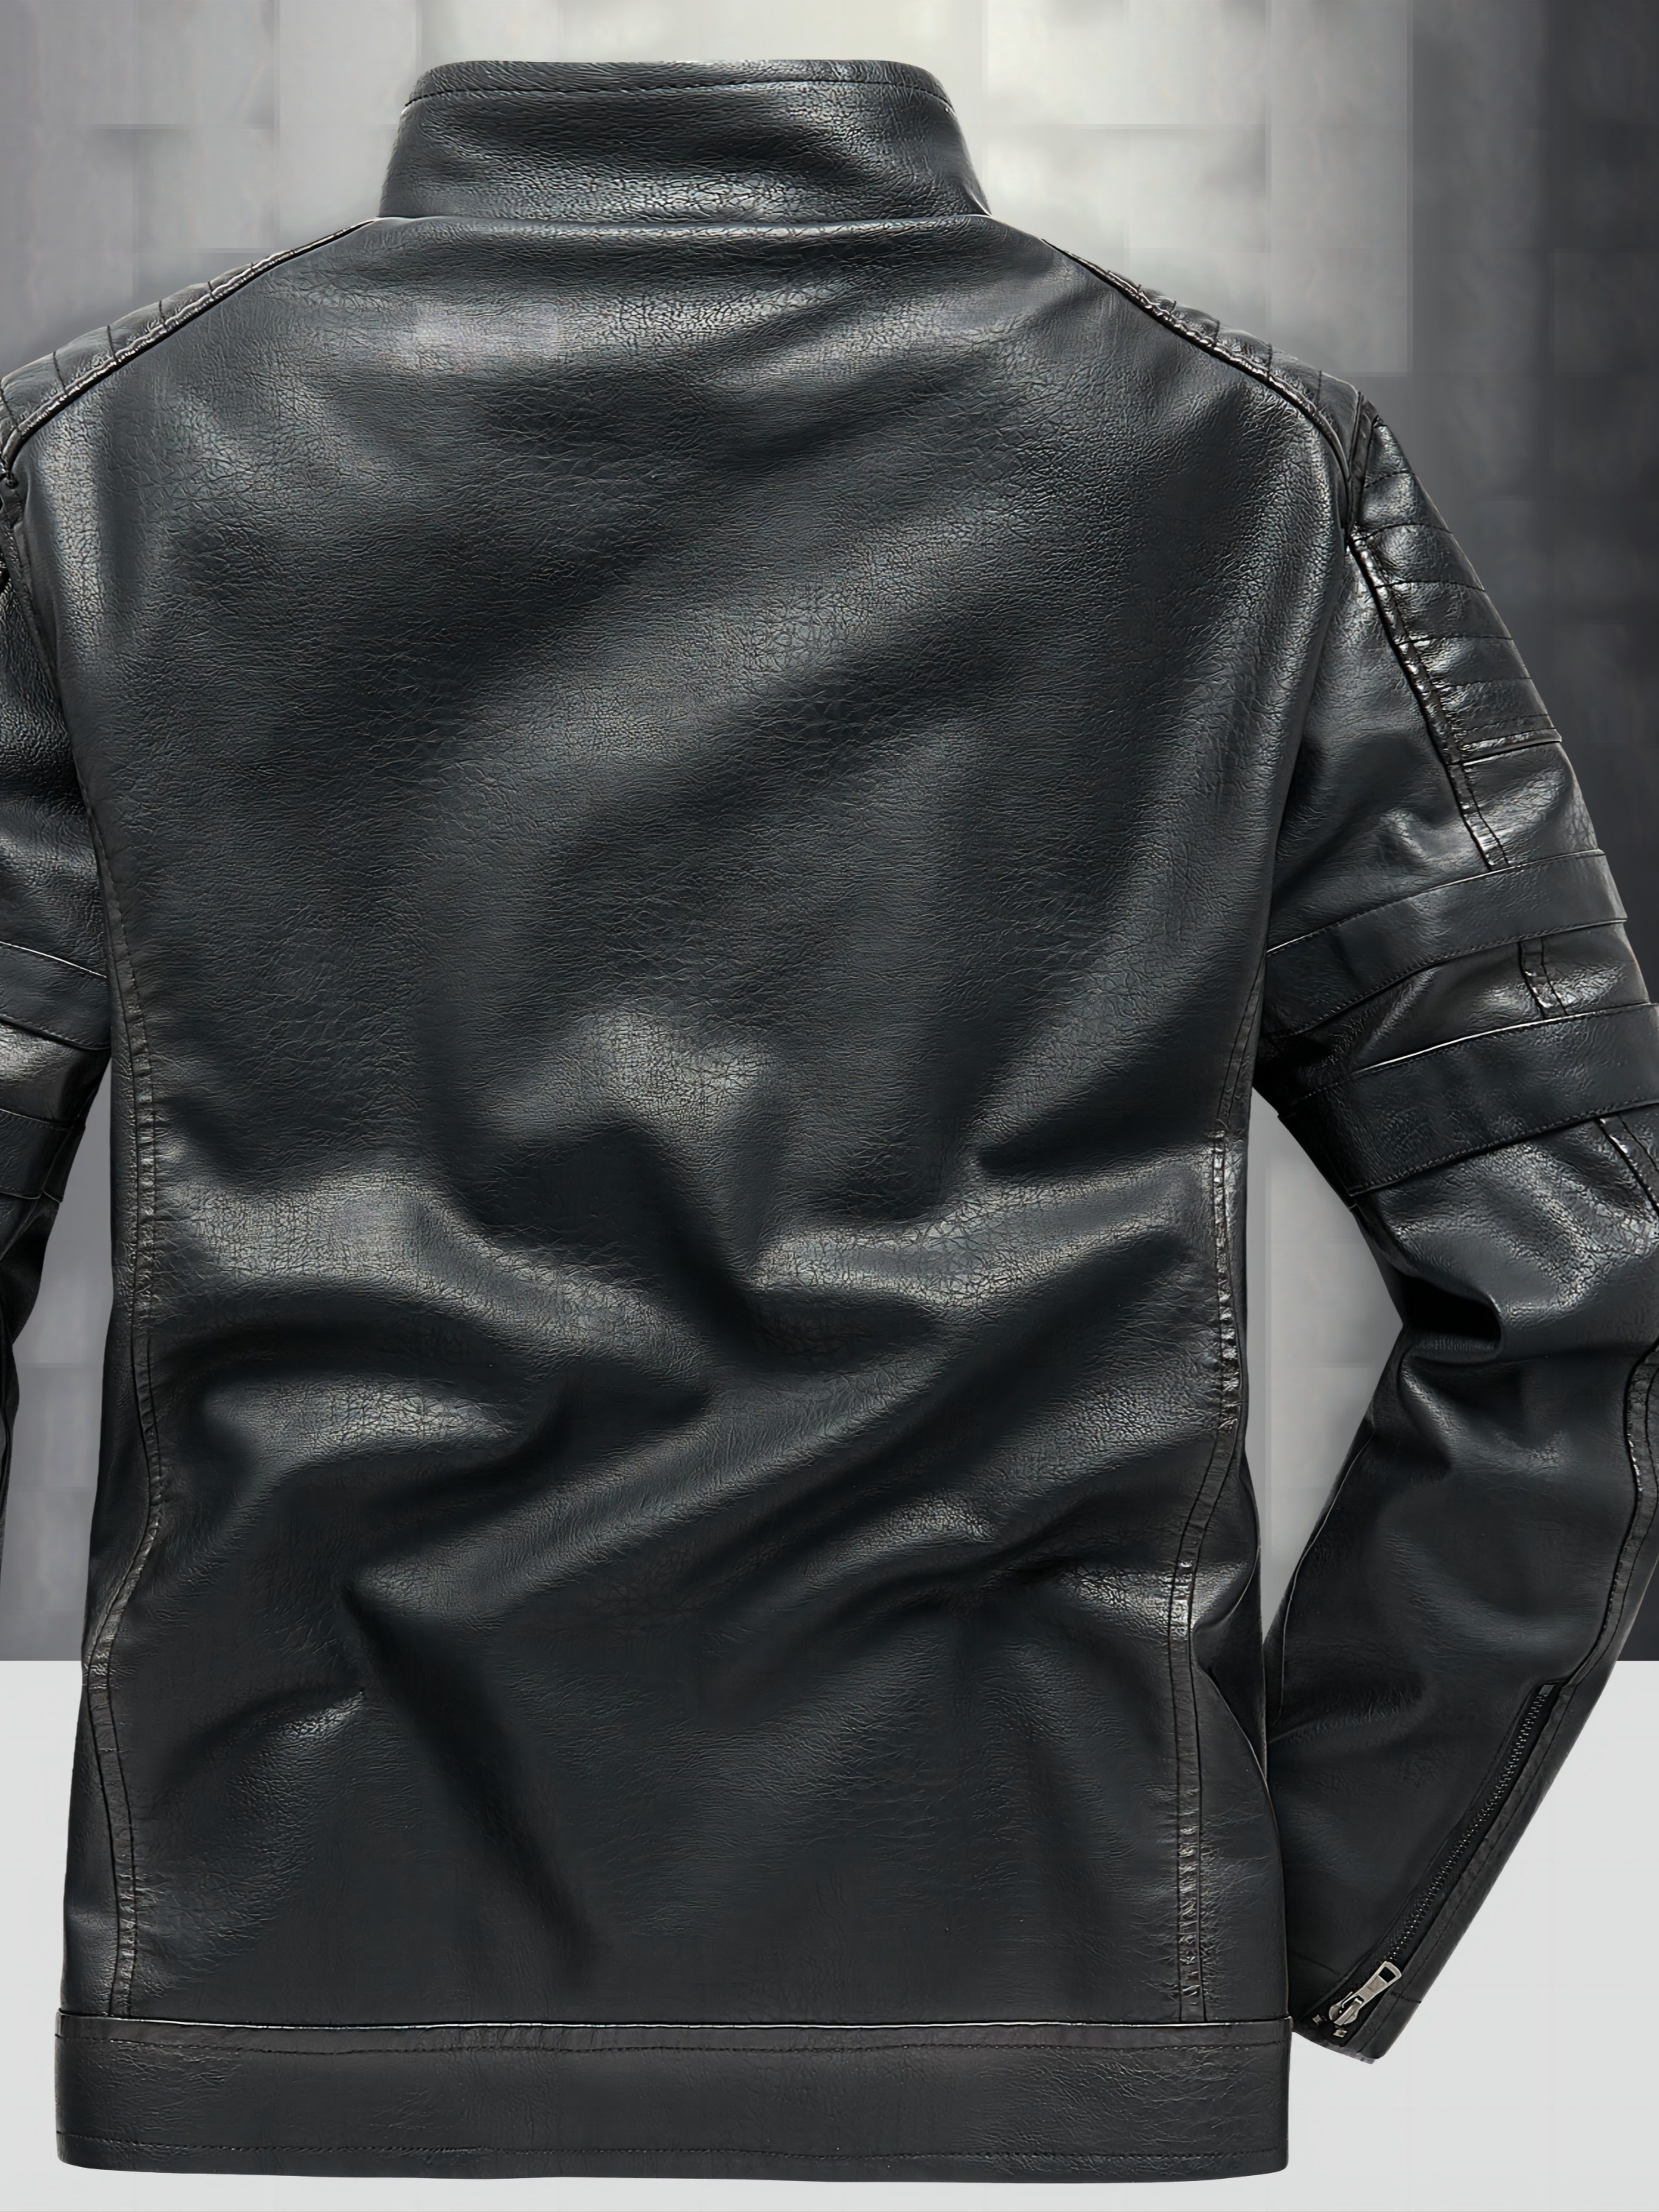 Men's Faux Leather Fleece Lined Jacket Vintage Stand Collar Motorcycle PU  Leather Outwear Coat